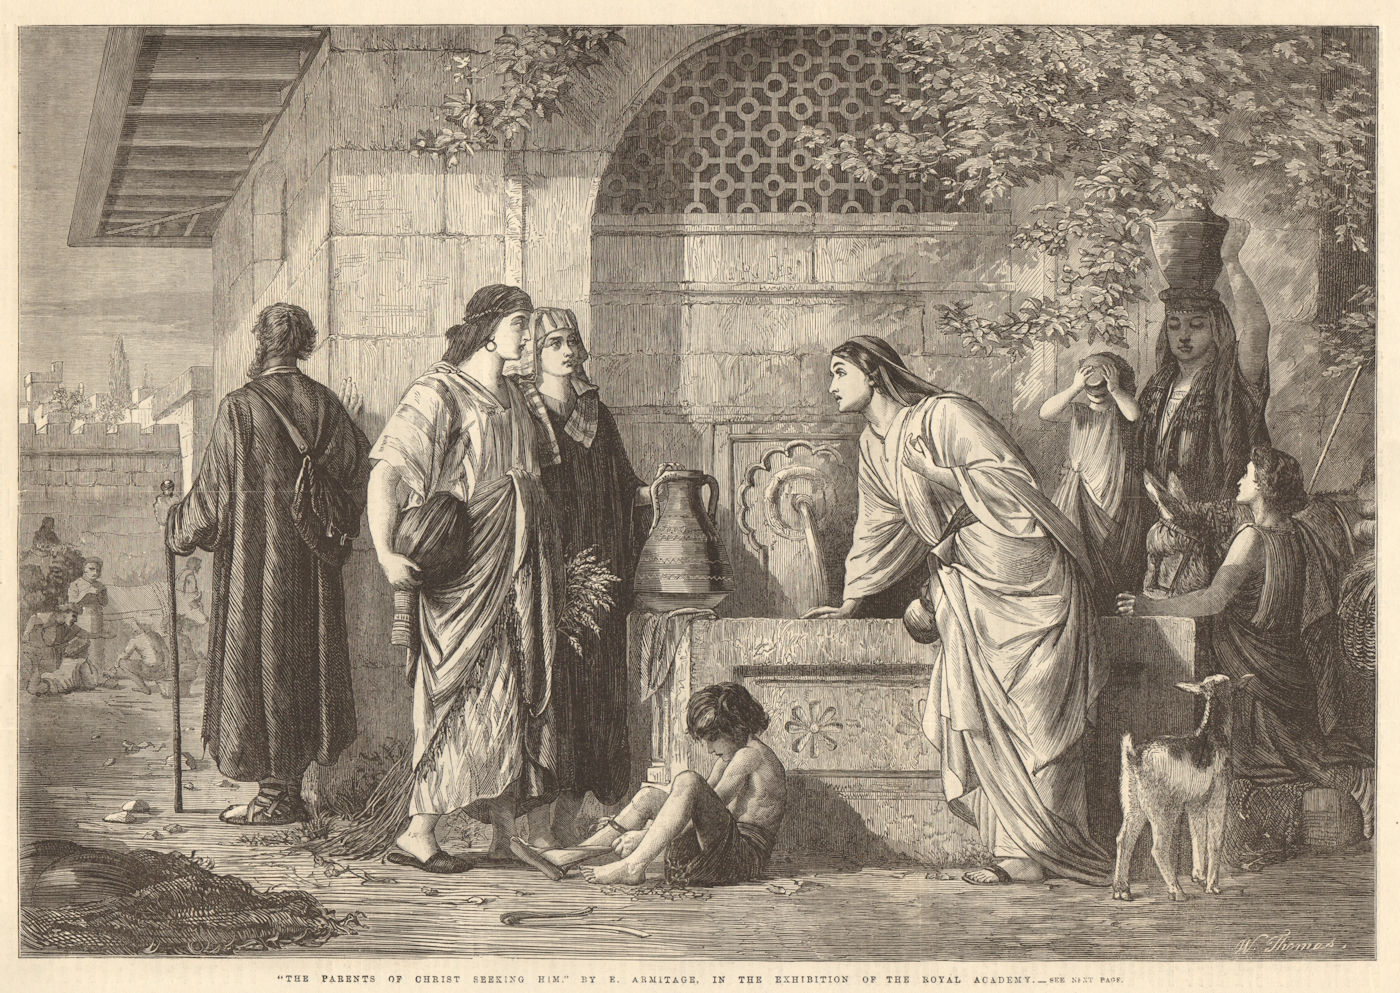 Associate Product "The parents of Christ seeking him", by E. Armitage. Family. Bible 1866 print